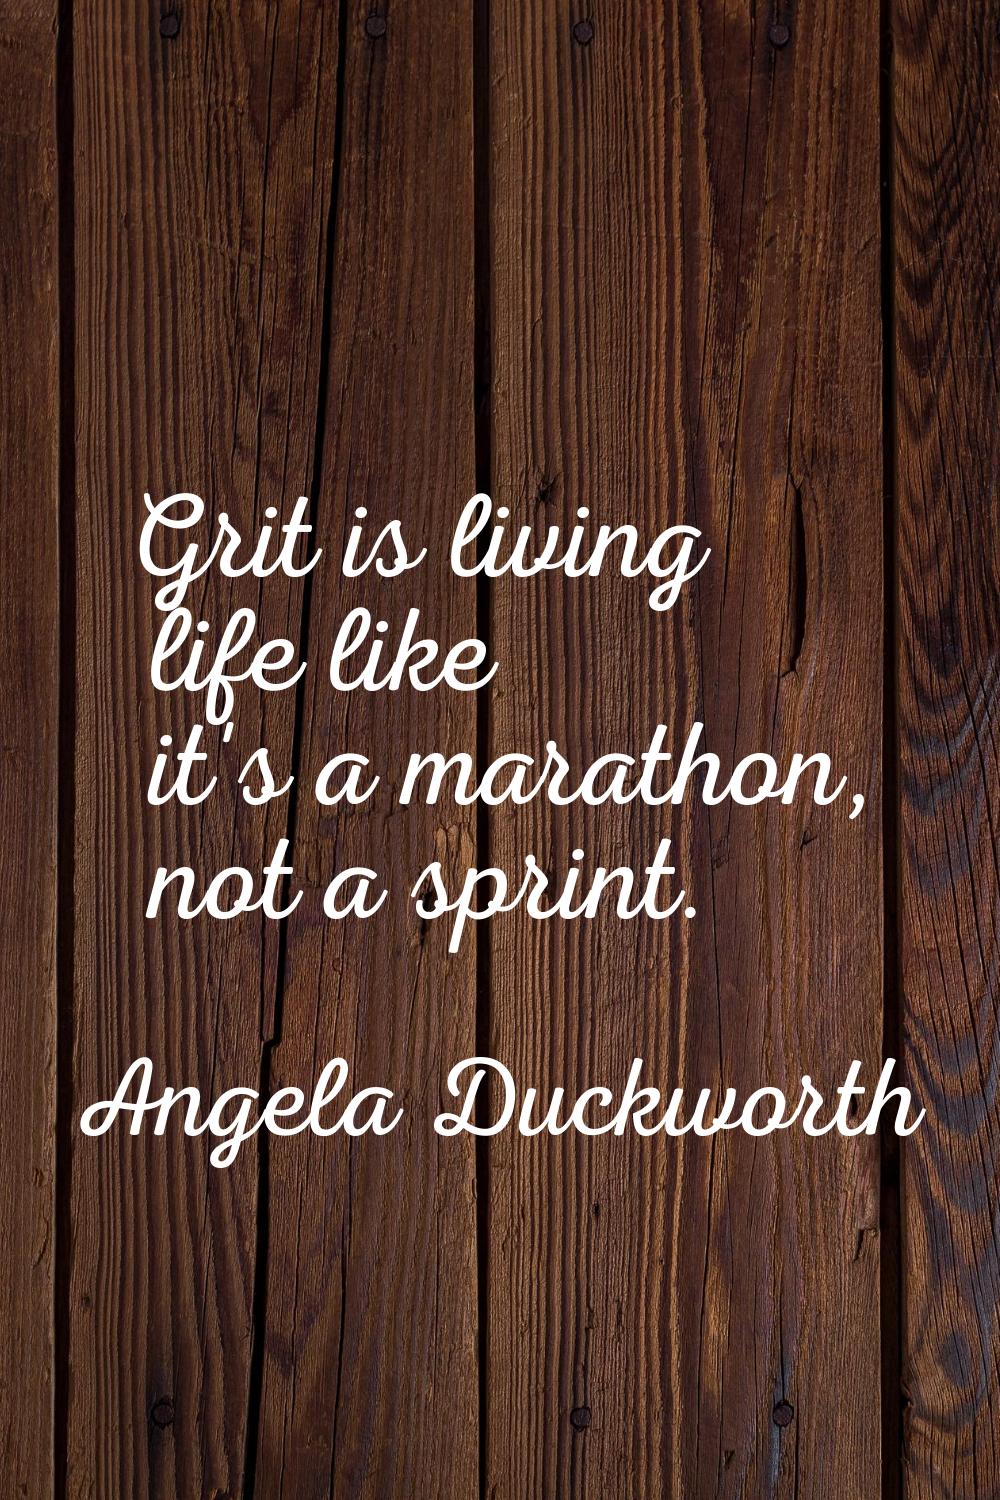 Grit is living life like it's a marathon, not a sprint.